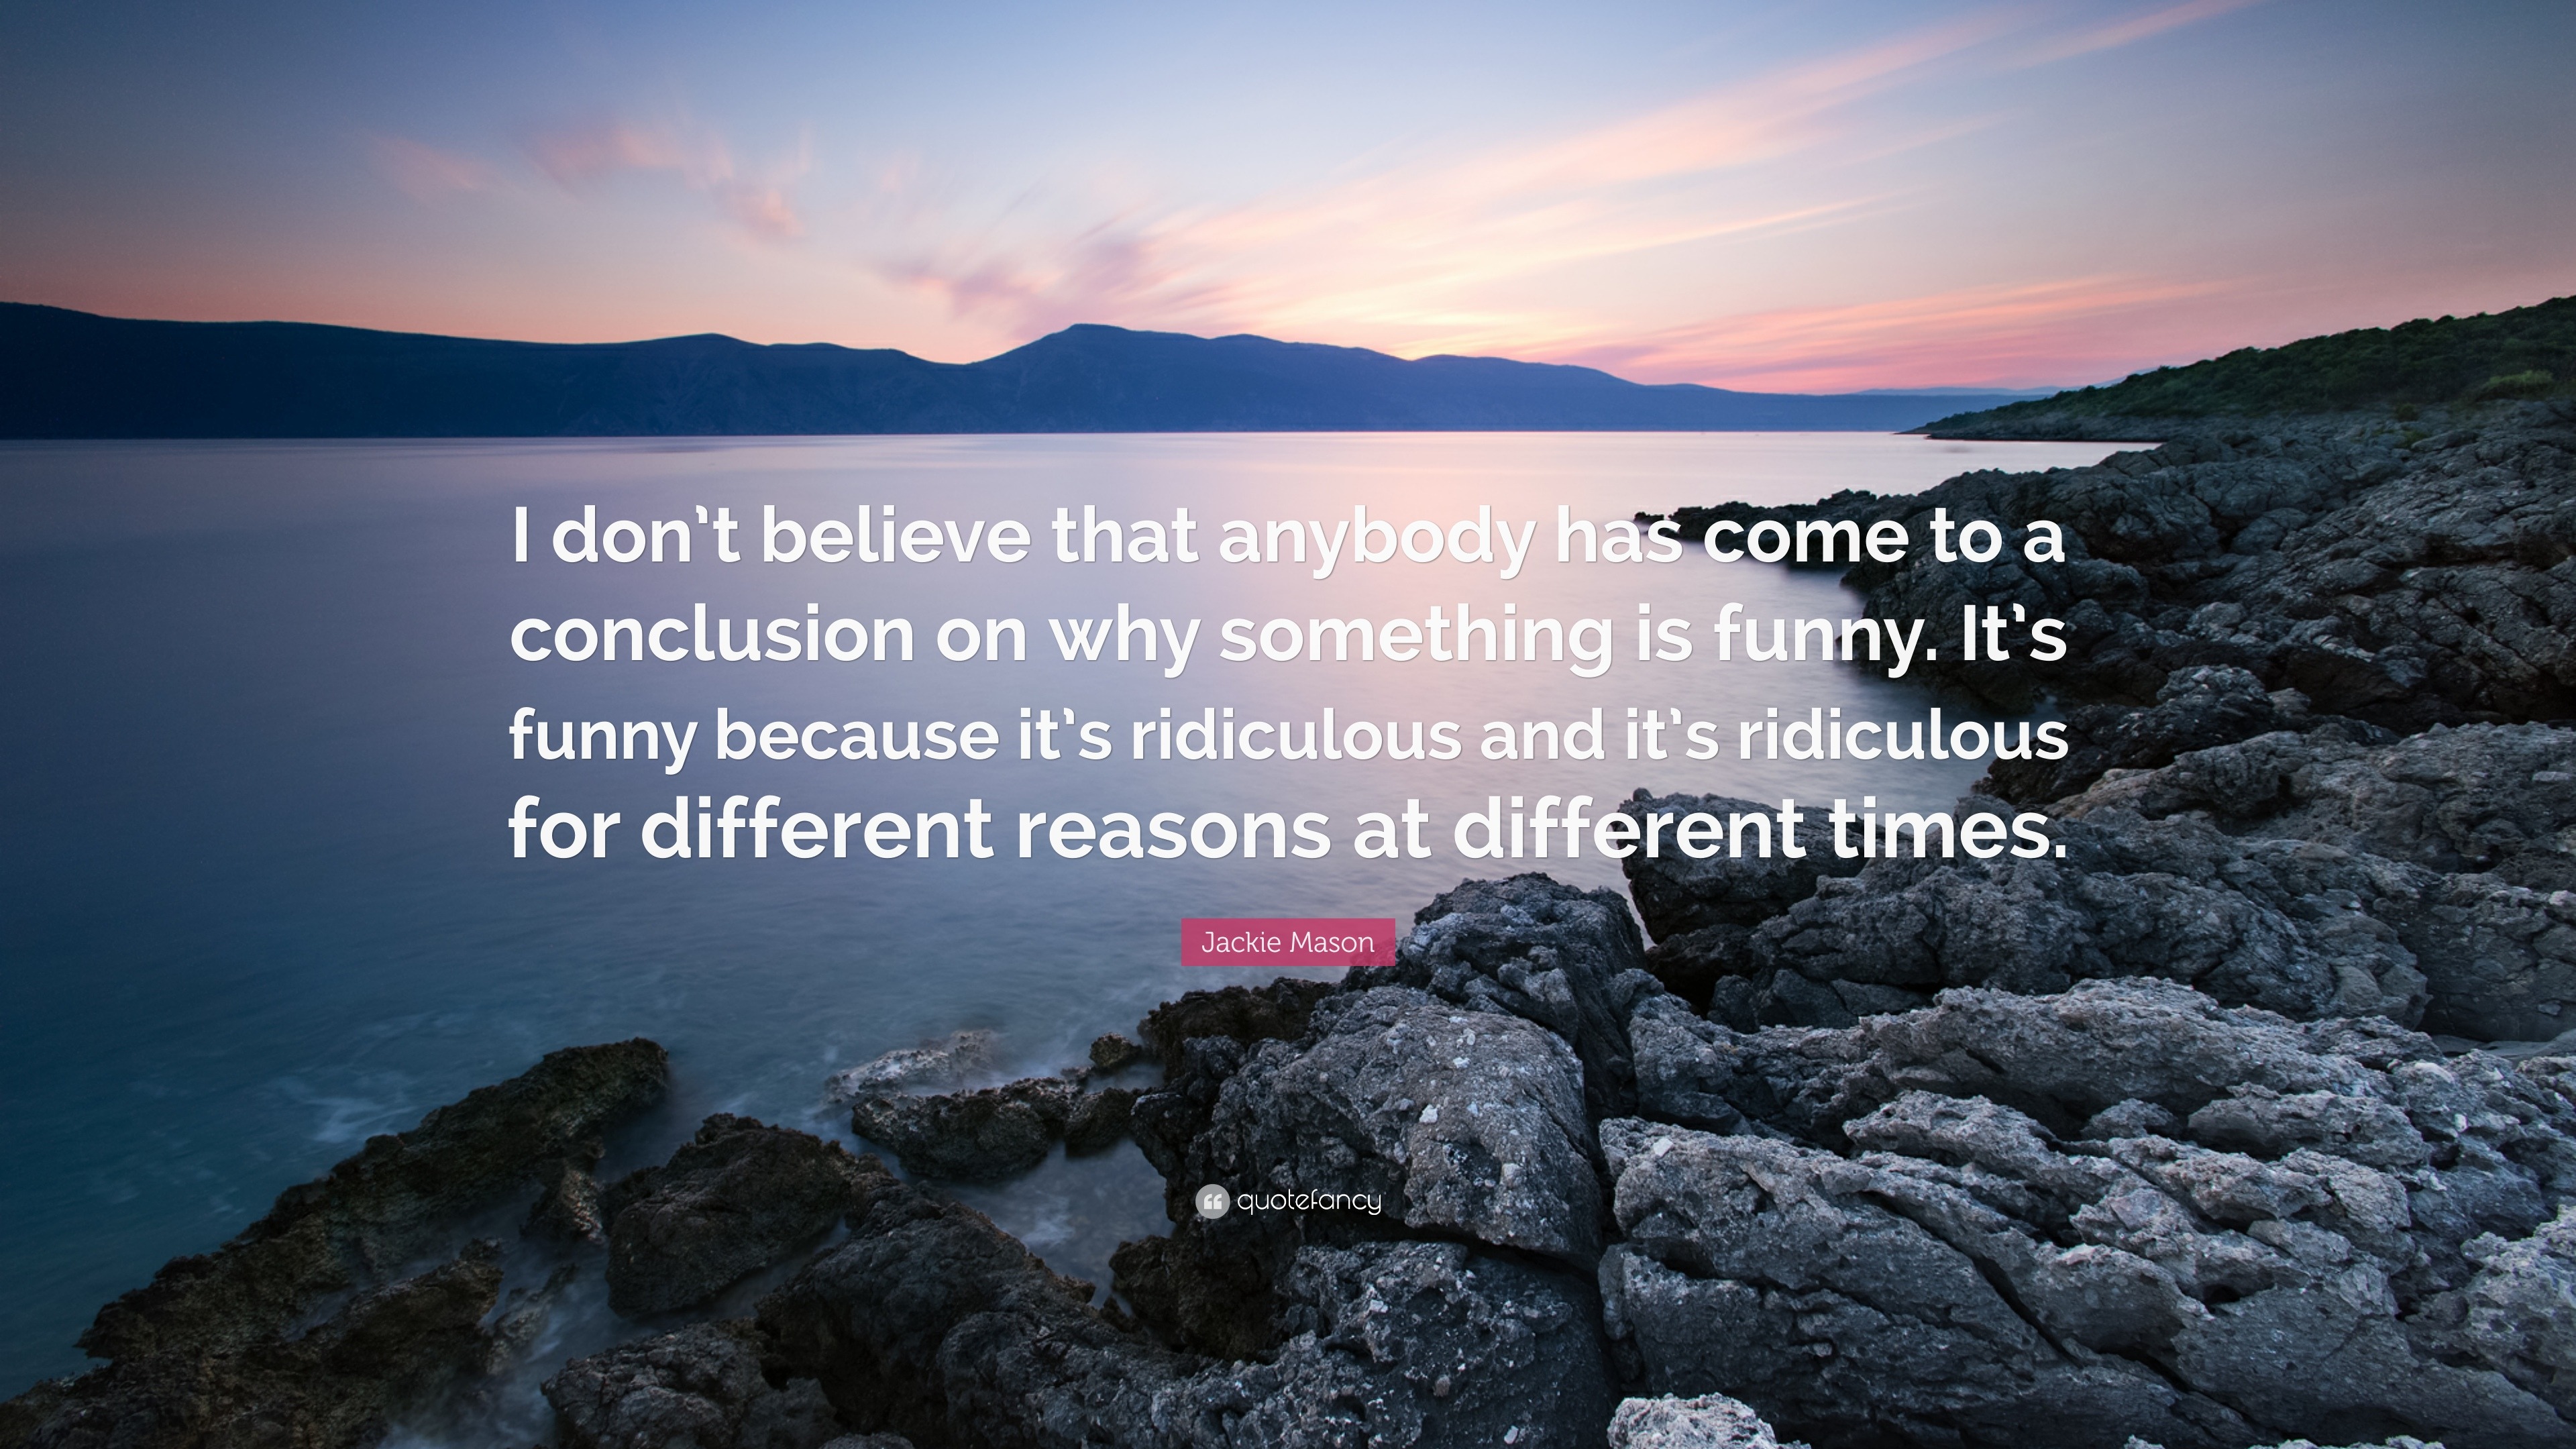 Jackie Mason Quote: “I don't believe that anybody has come to a conclusion  on why something is funny. It's funny because it's ridiculous and ...”